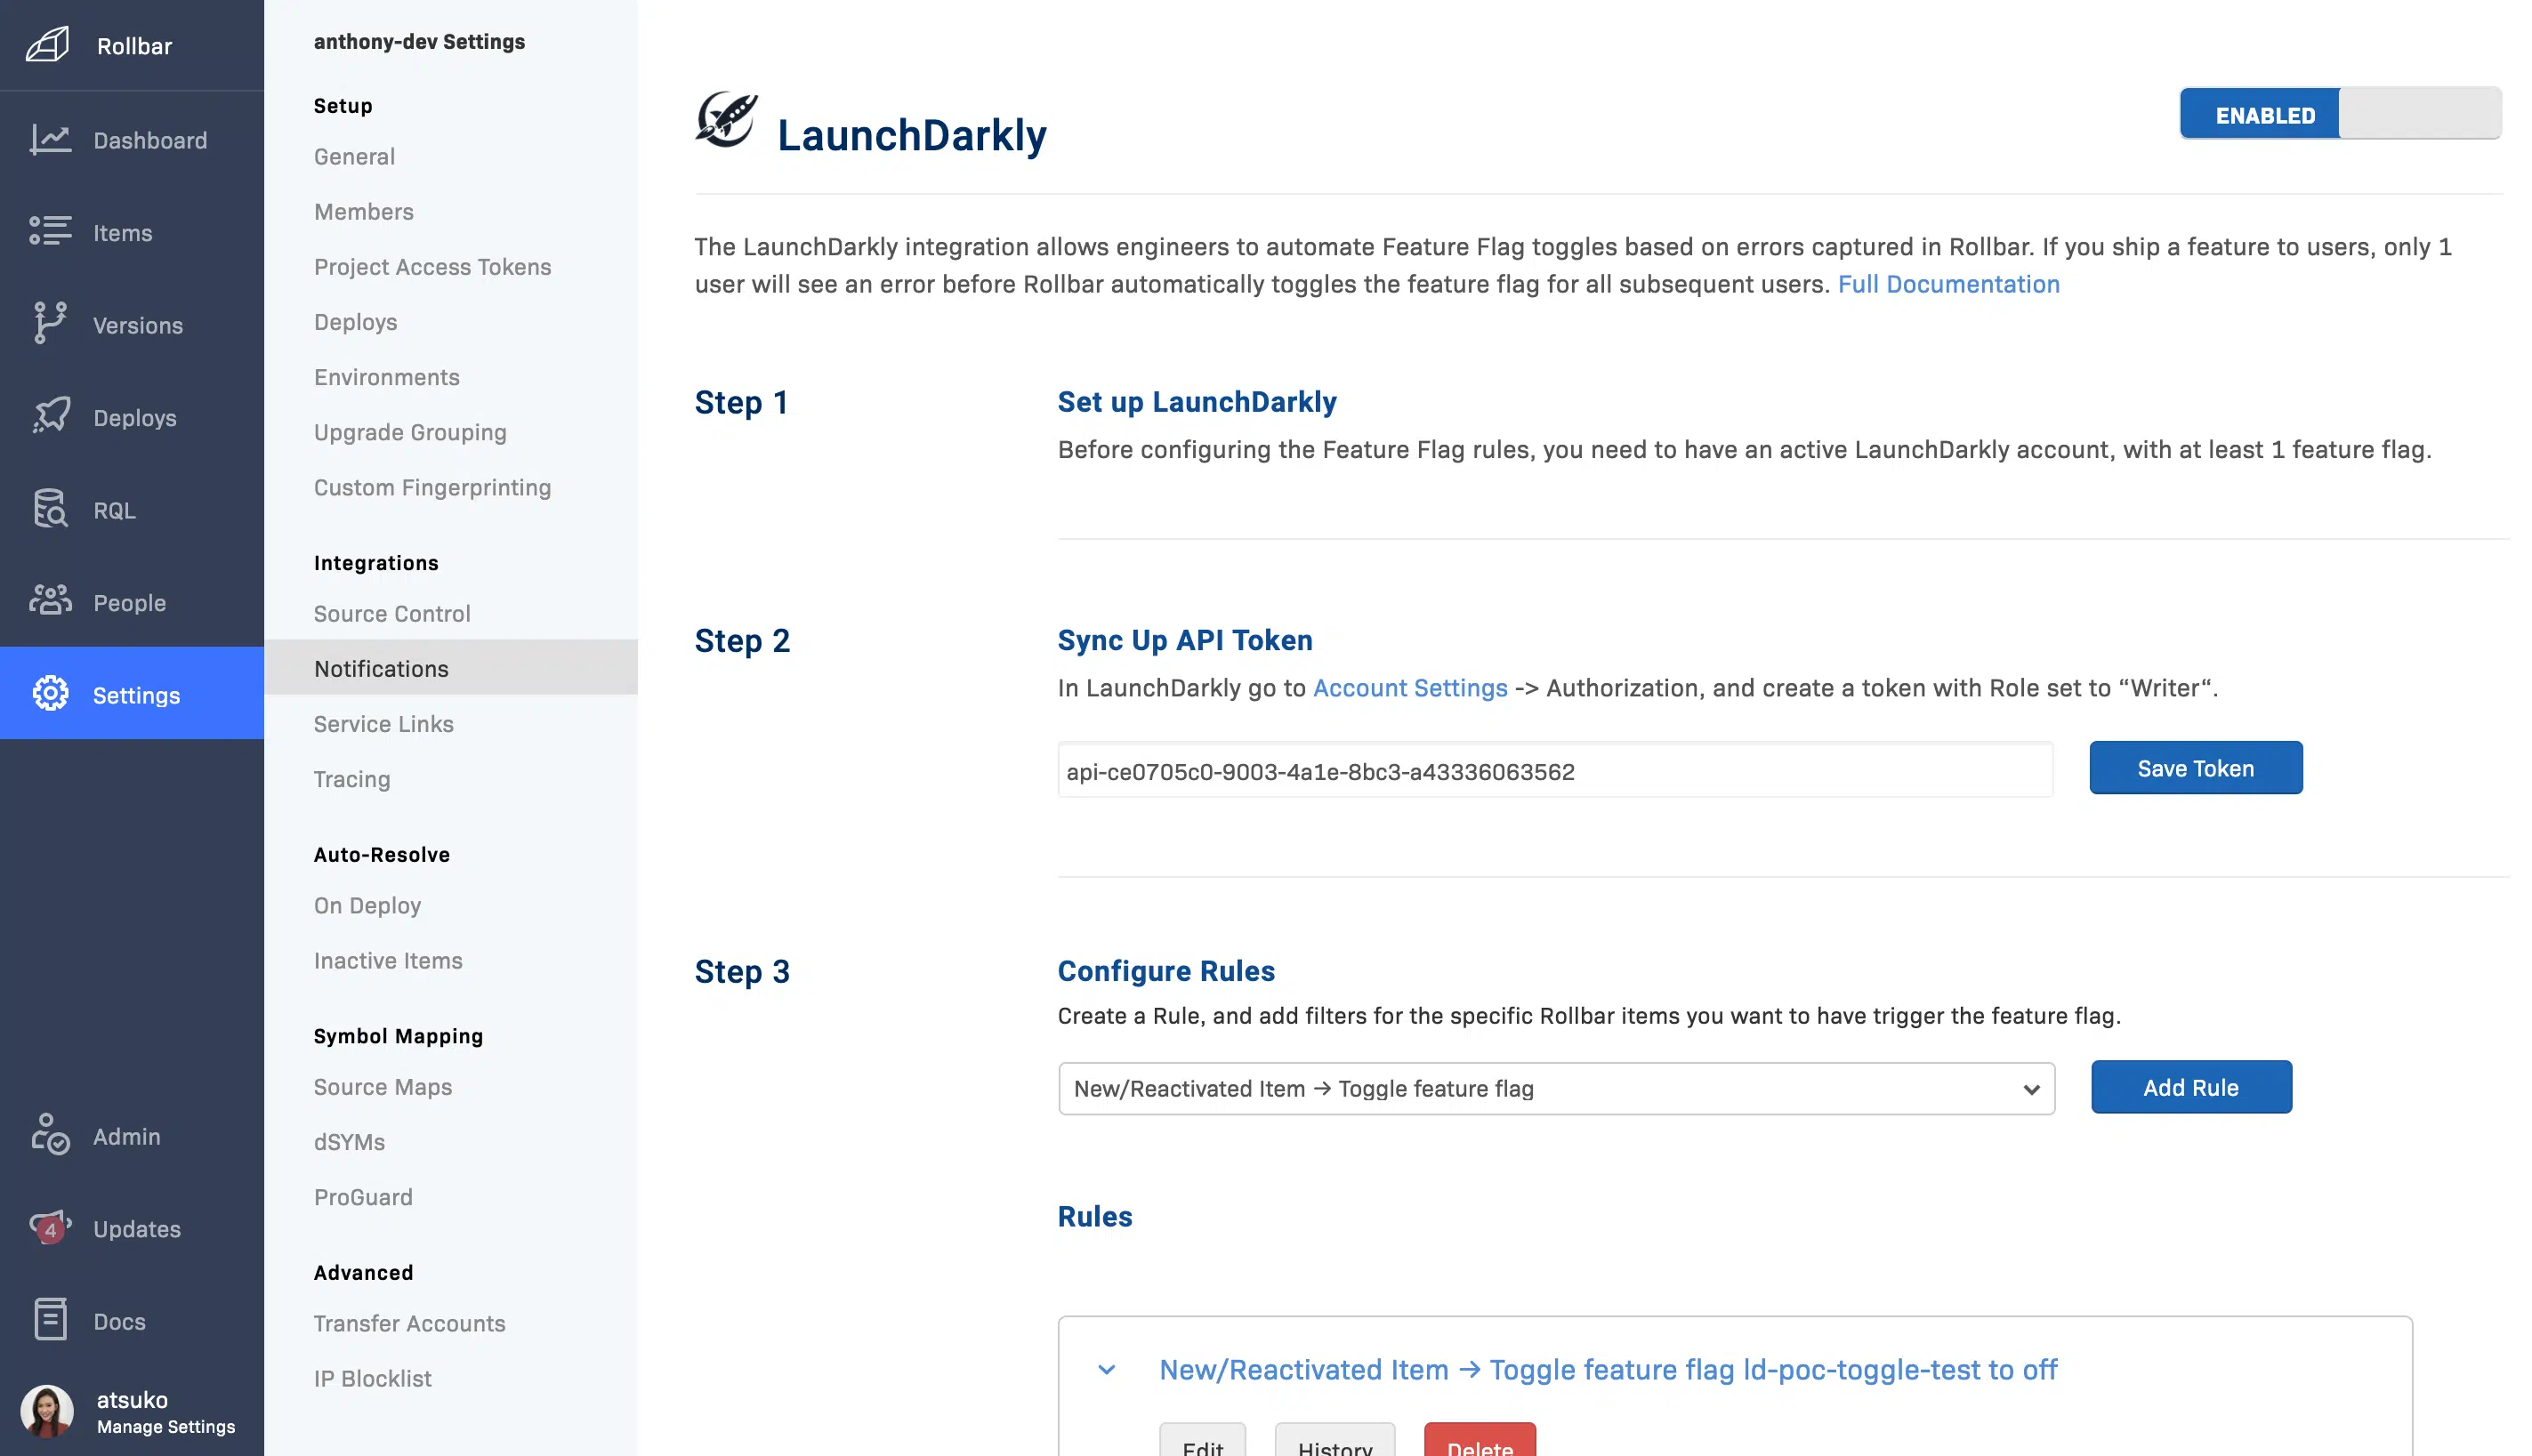 launchdarkly-feature-flag